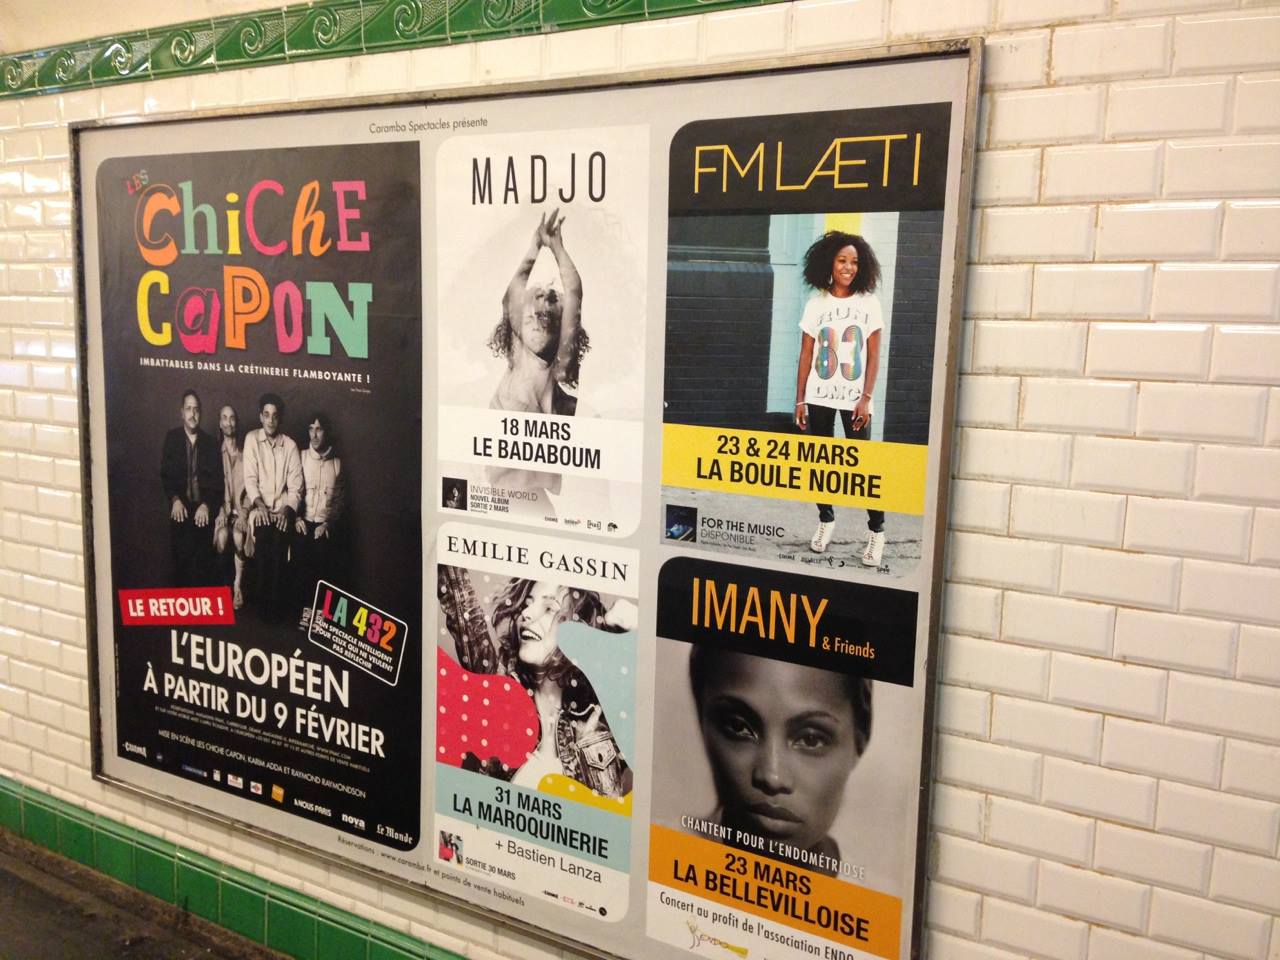 IMANY charity concert-poster metro